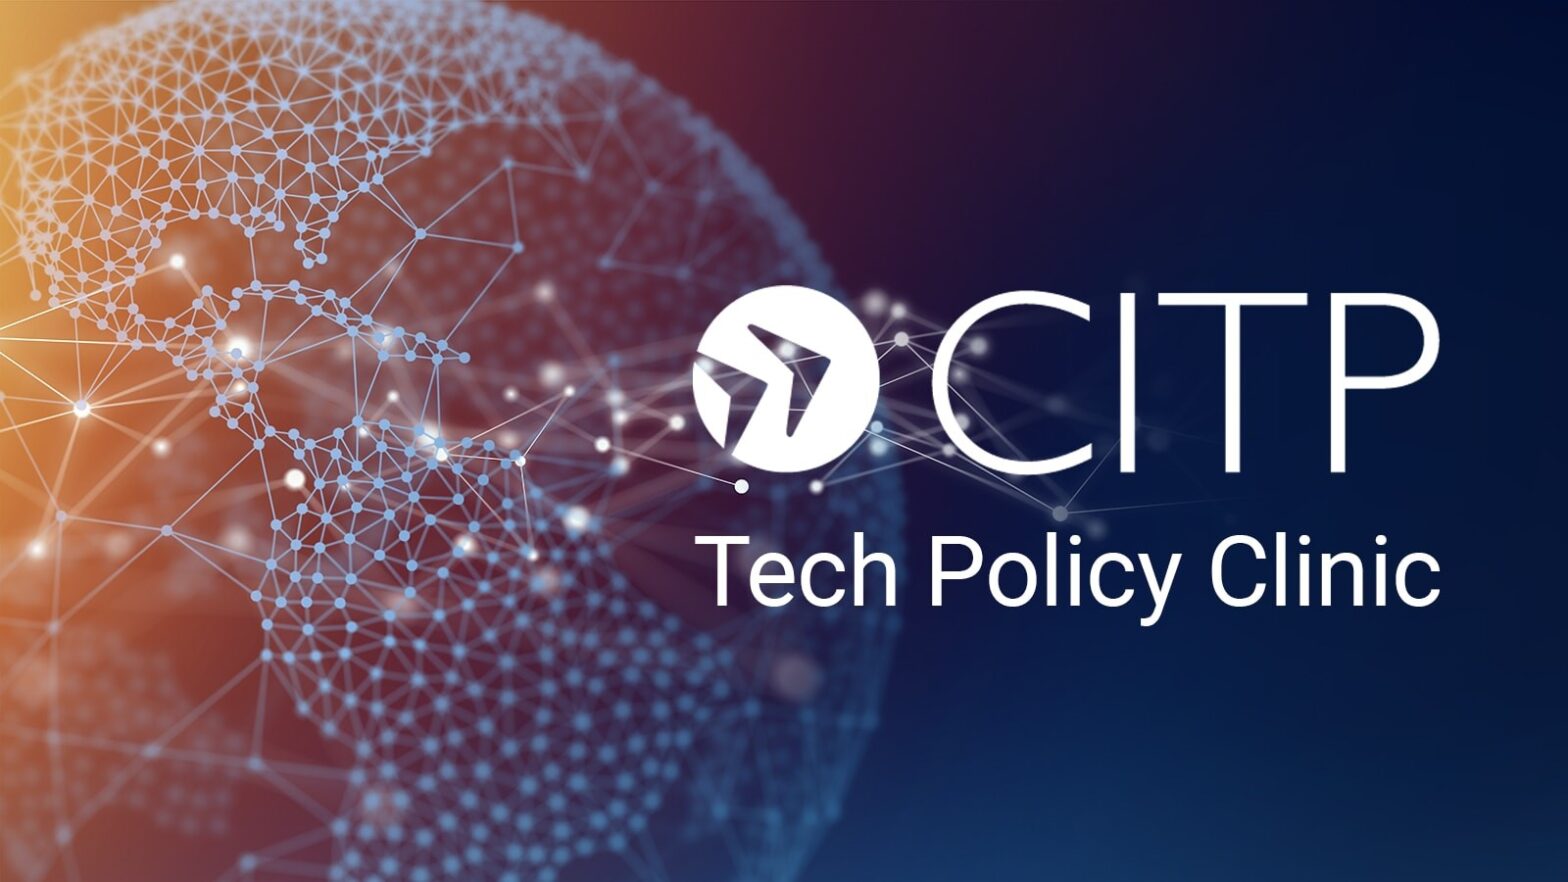 Globe with network motif and text "CITP Tech Policy Clinic"